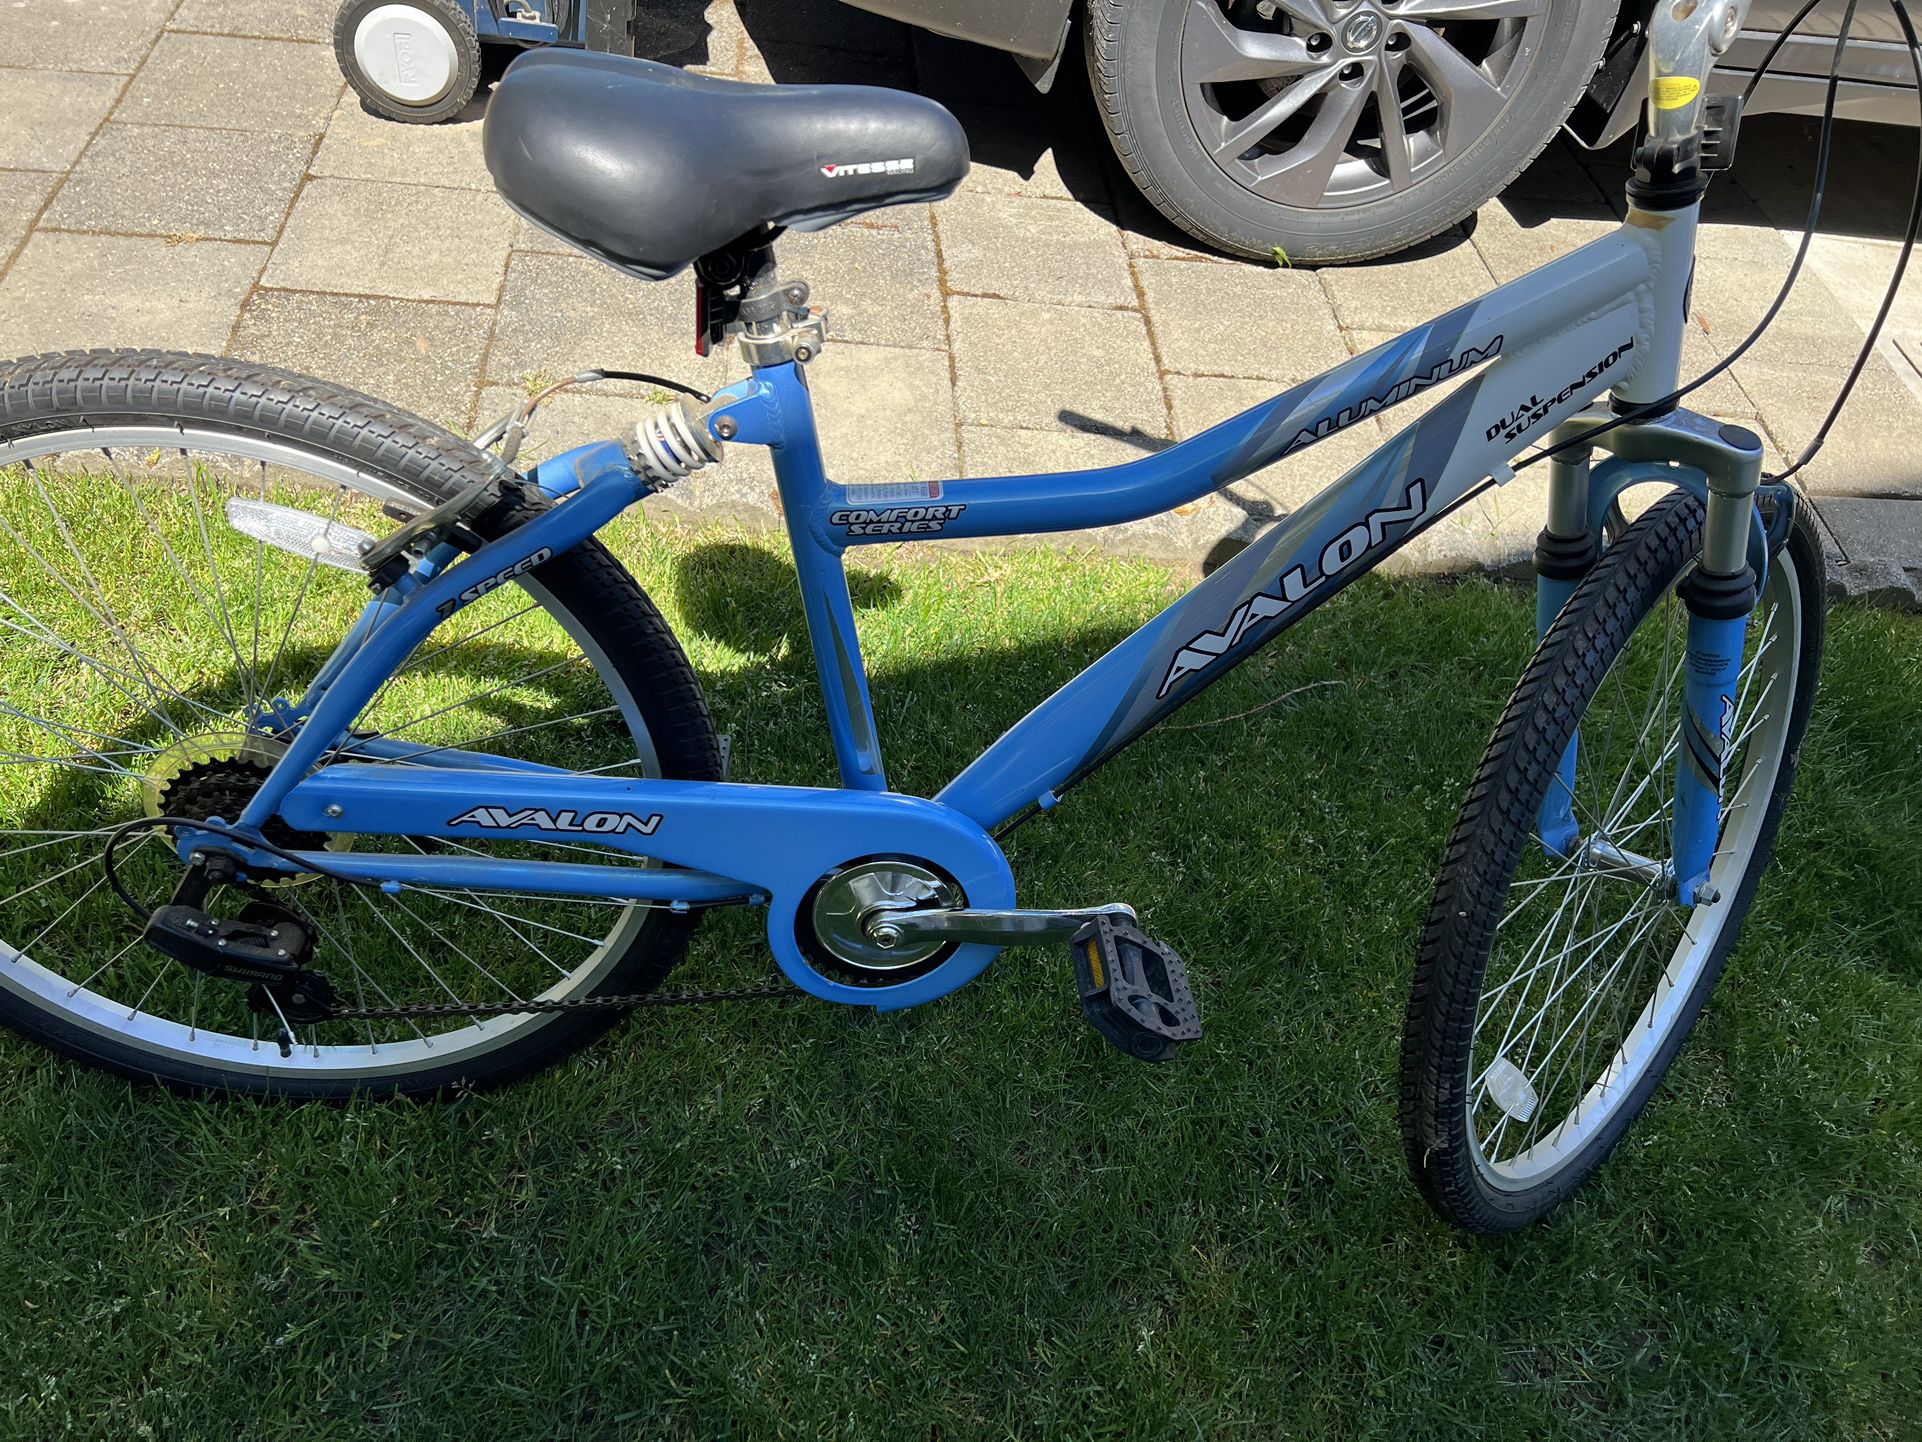 Avalon Seven Speed Comfort, Serious Bike, Great Condition 